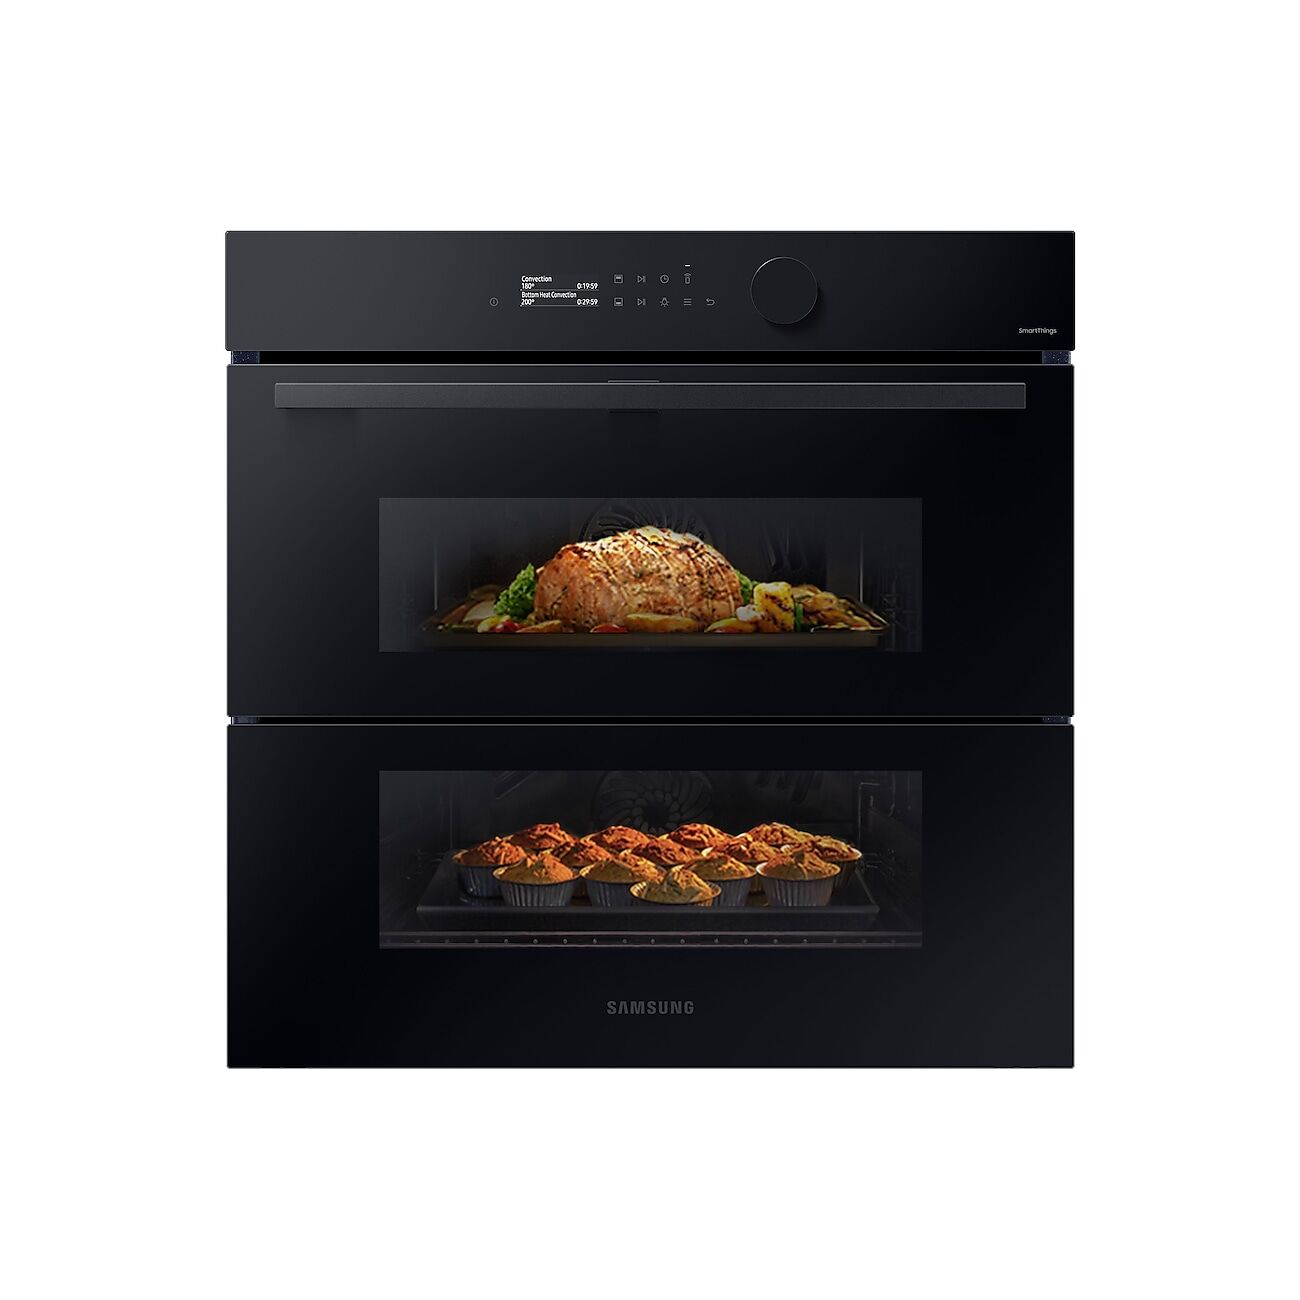 Samsung NV7B5750TAK Series 5 Smart Oven with Dual Cook Flex and Air Fry in Black